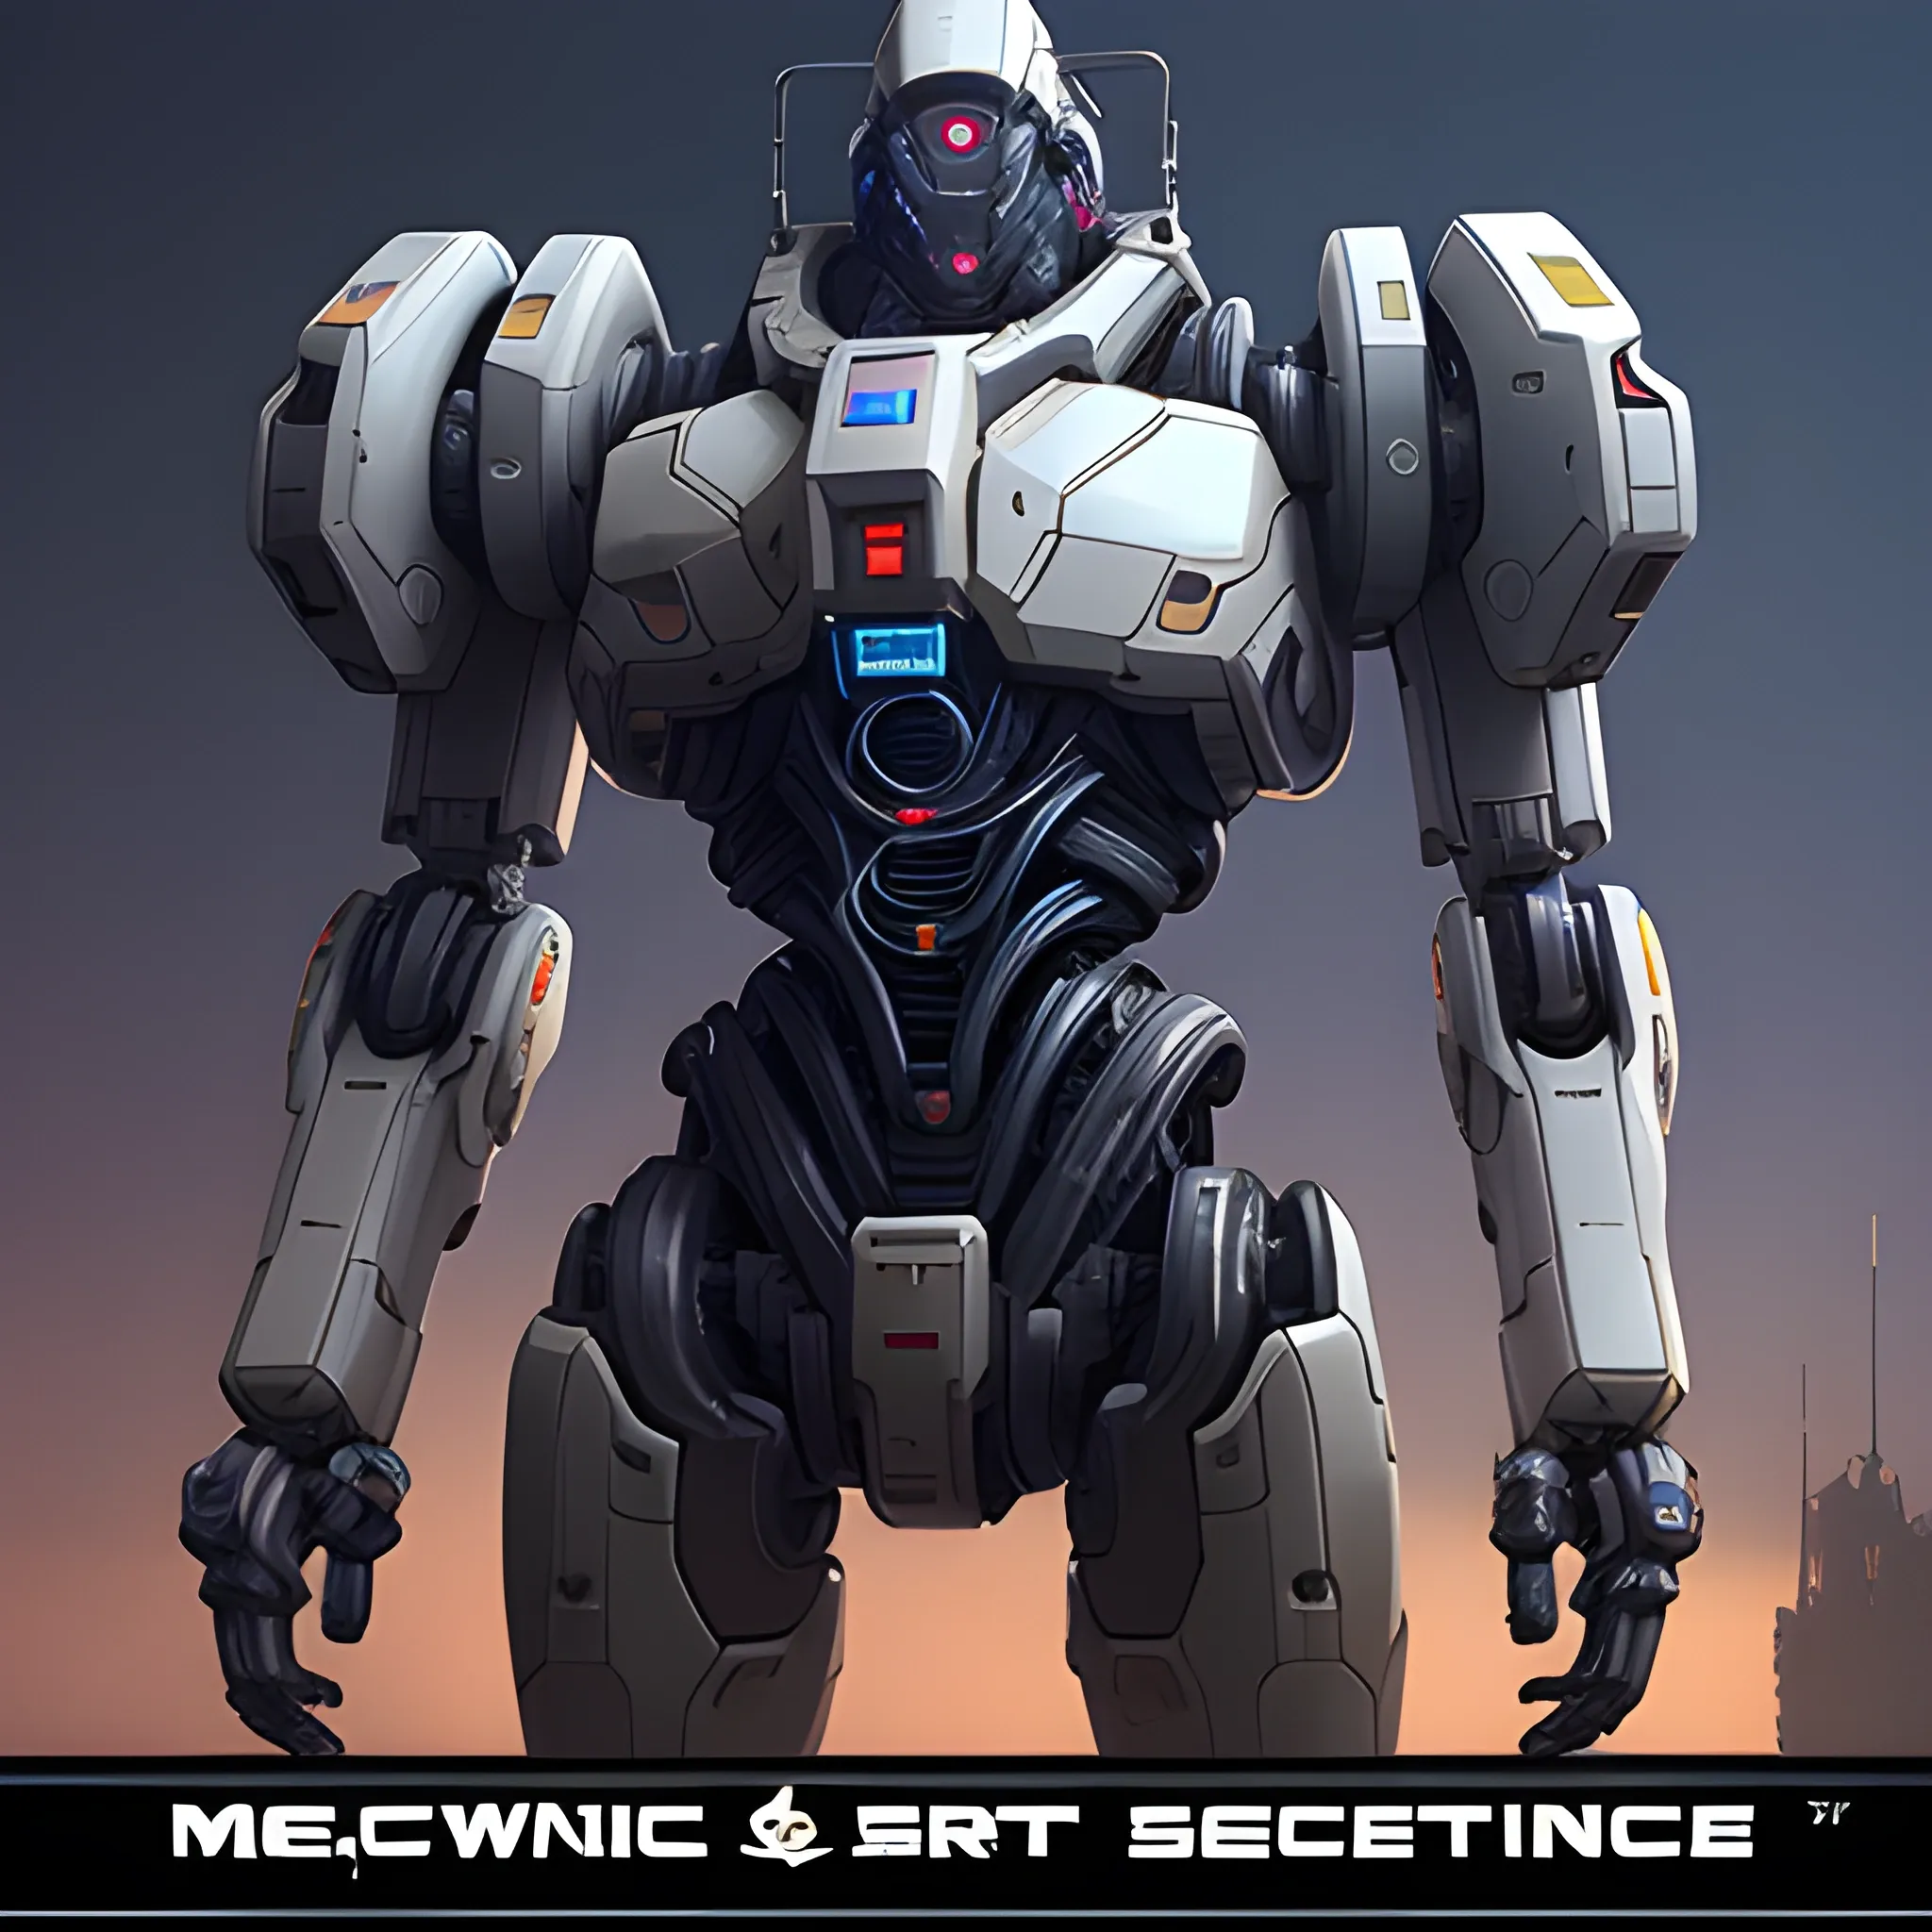 Networking，Mech, science fiction